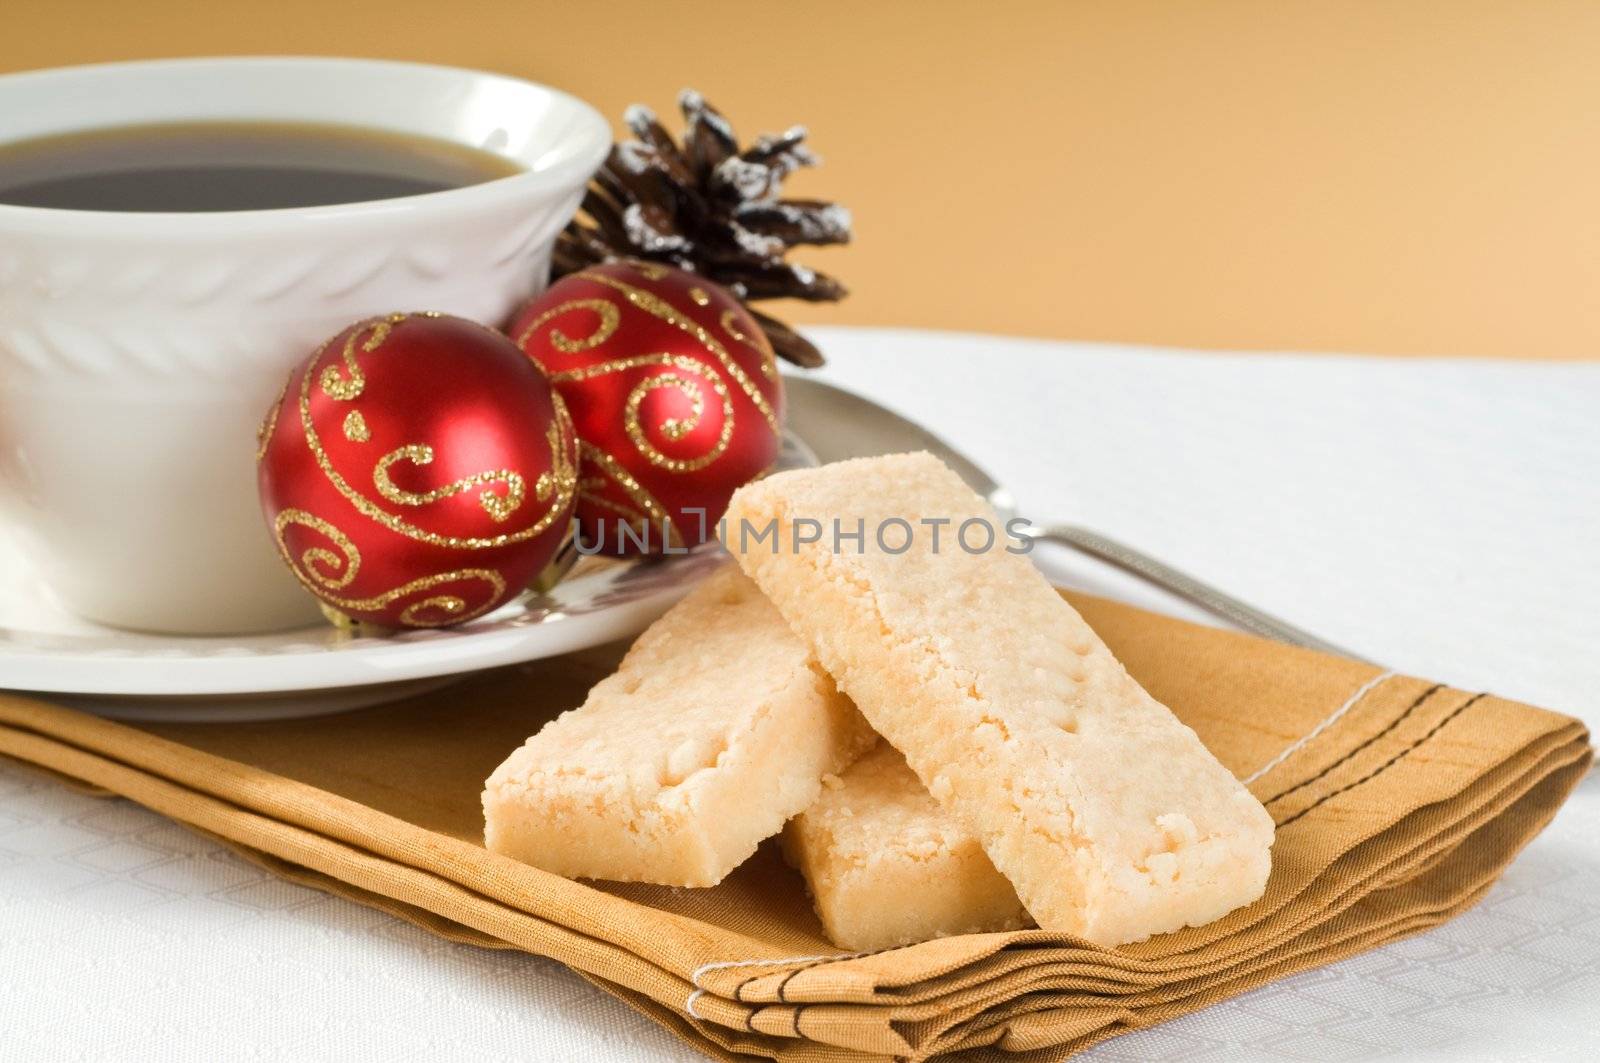 Homemade christmas shortbread served with fresh coffee.